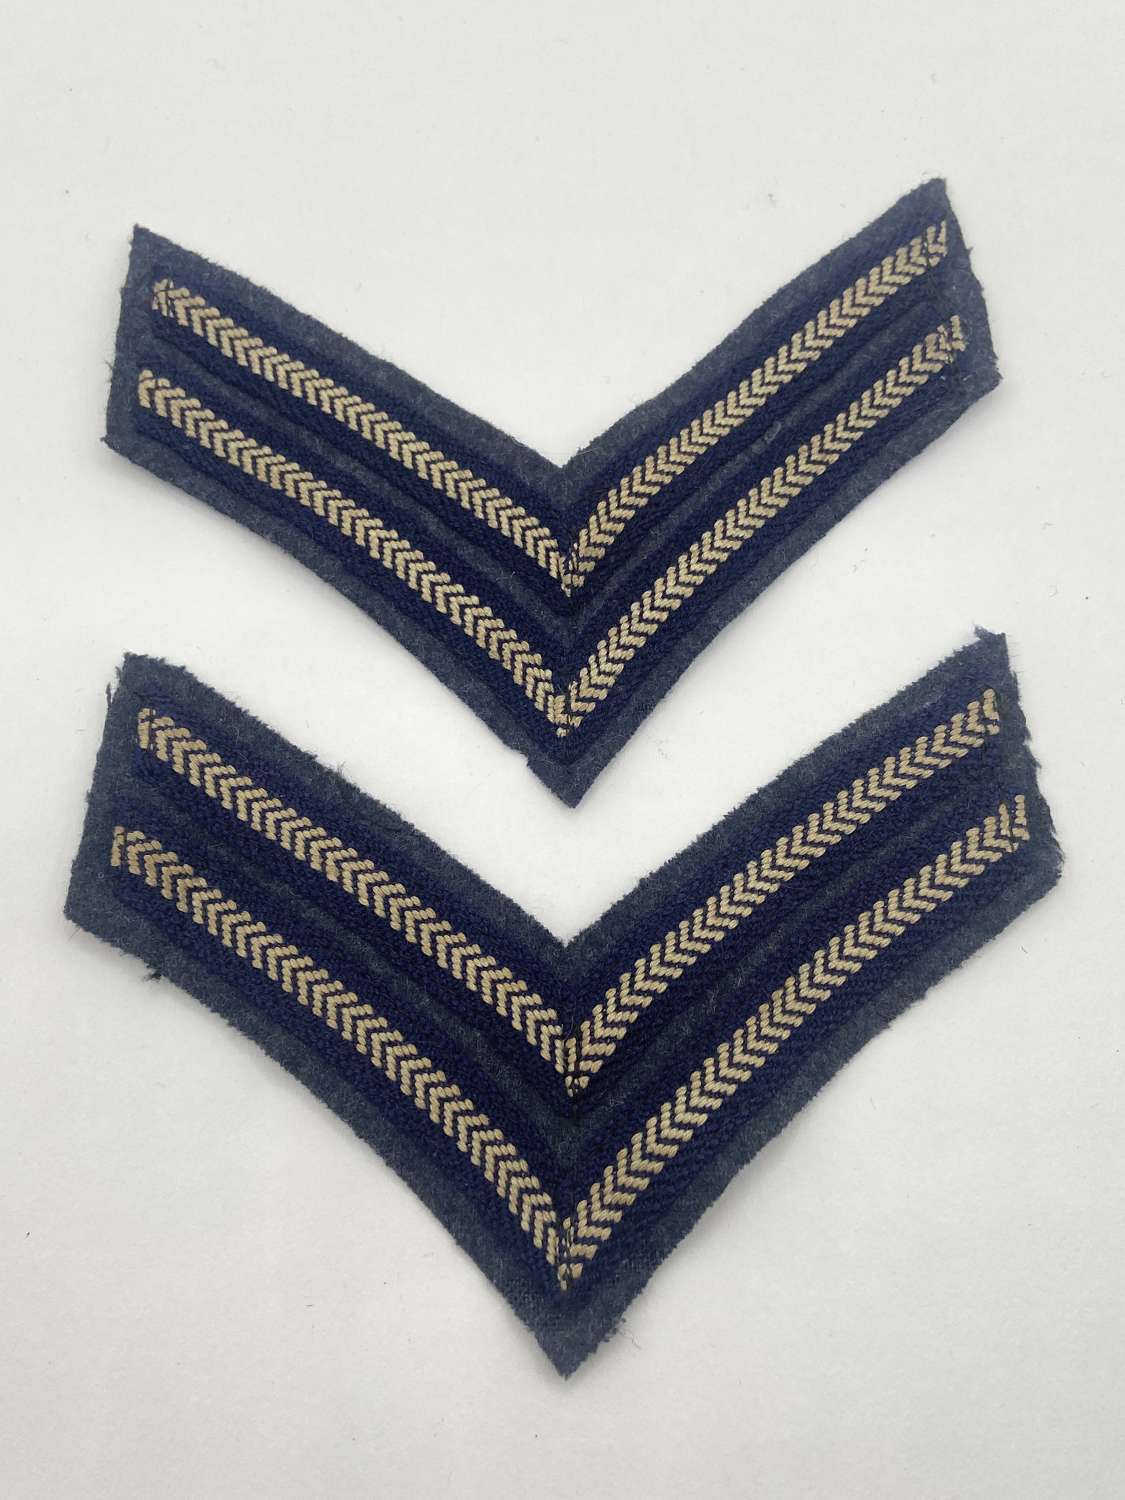 Post WW2 RAF Royal Air Force Corporal's Rank Chevrons Patches